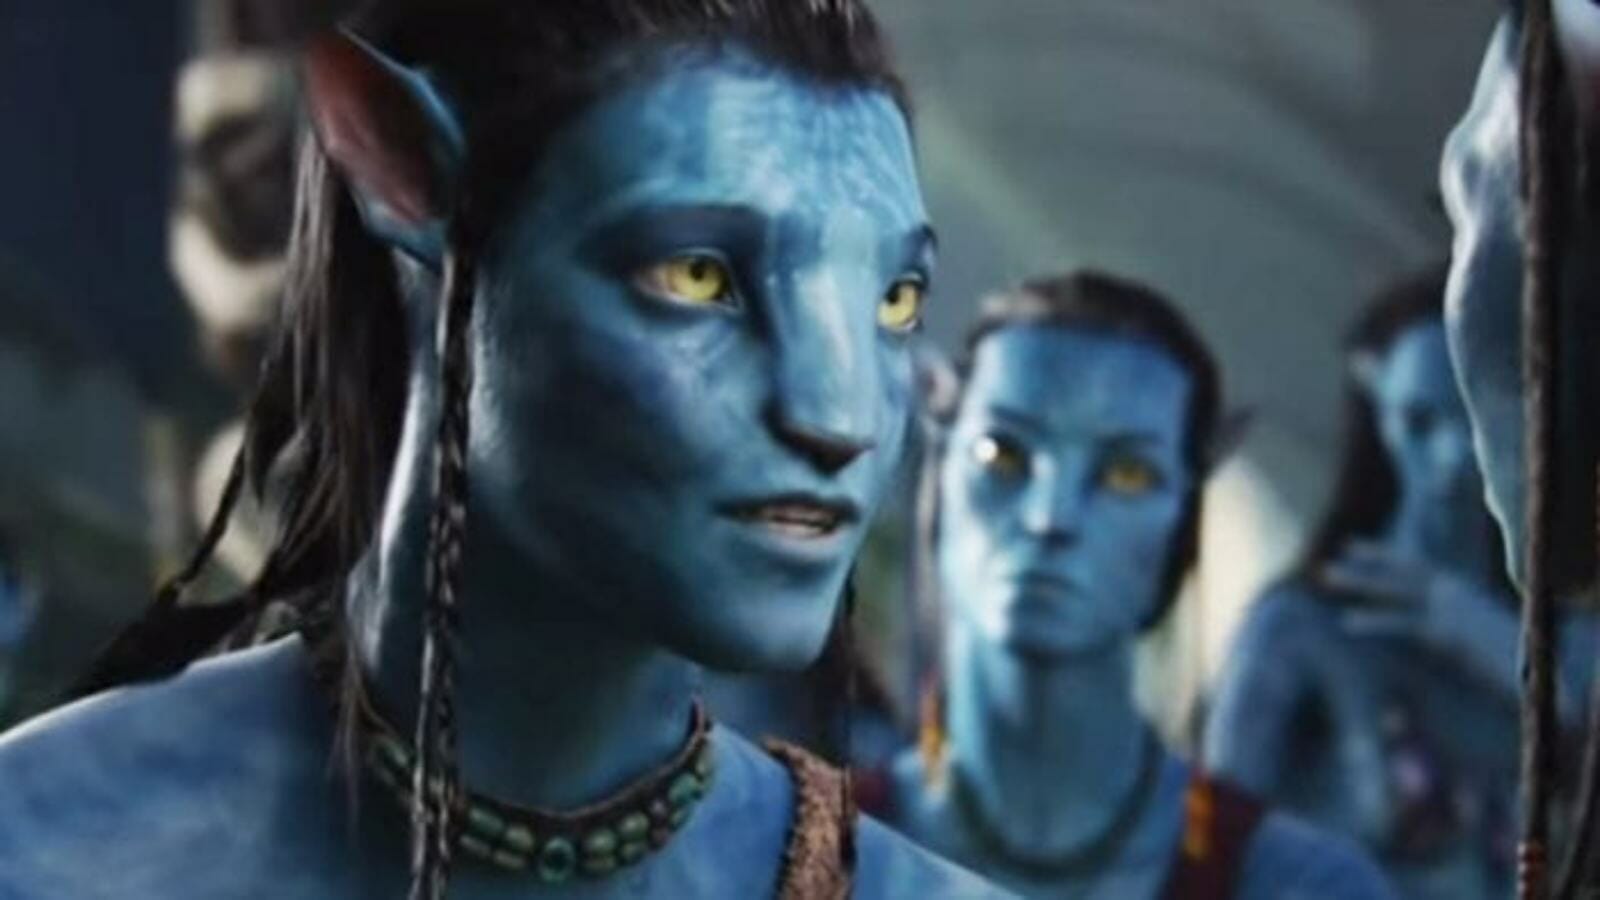 Disney Reveals First Glimpse Of Avatar 2 At The CinemaCon Event